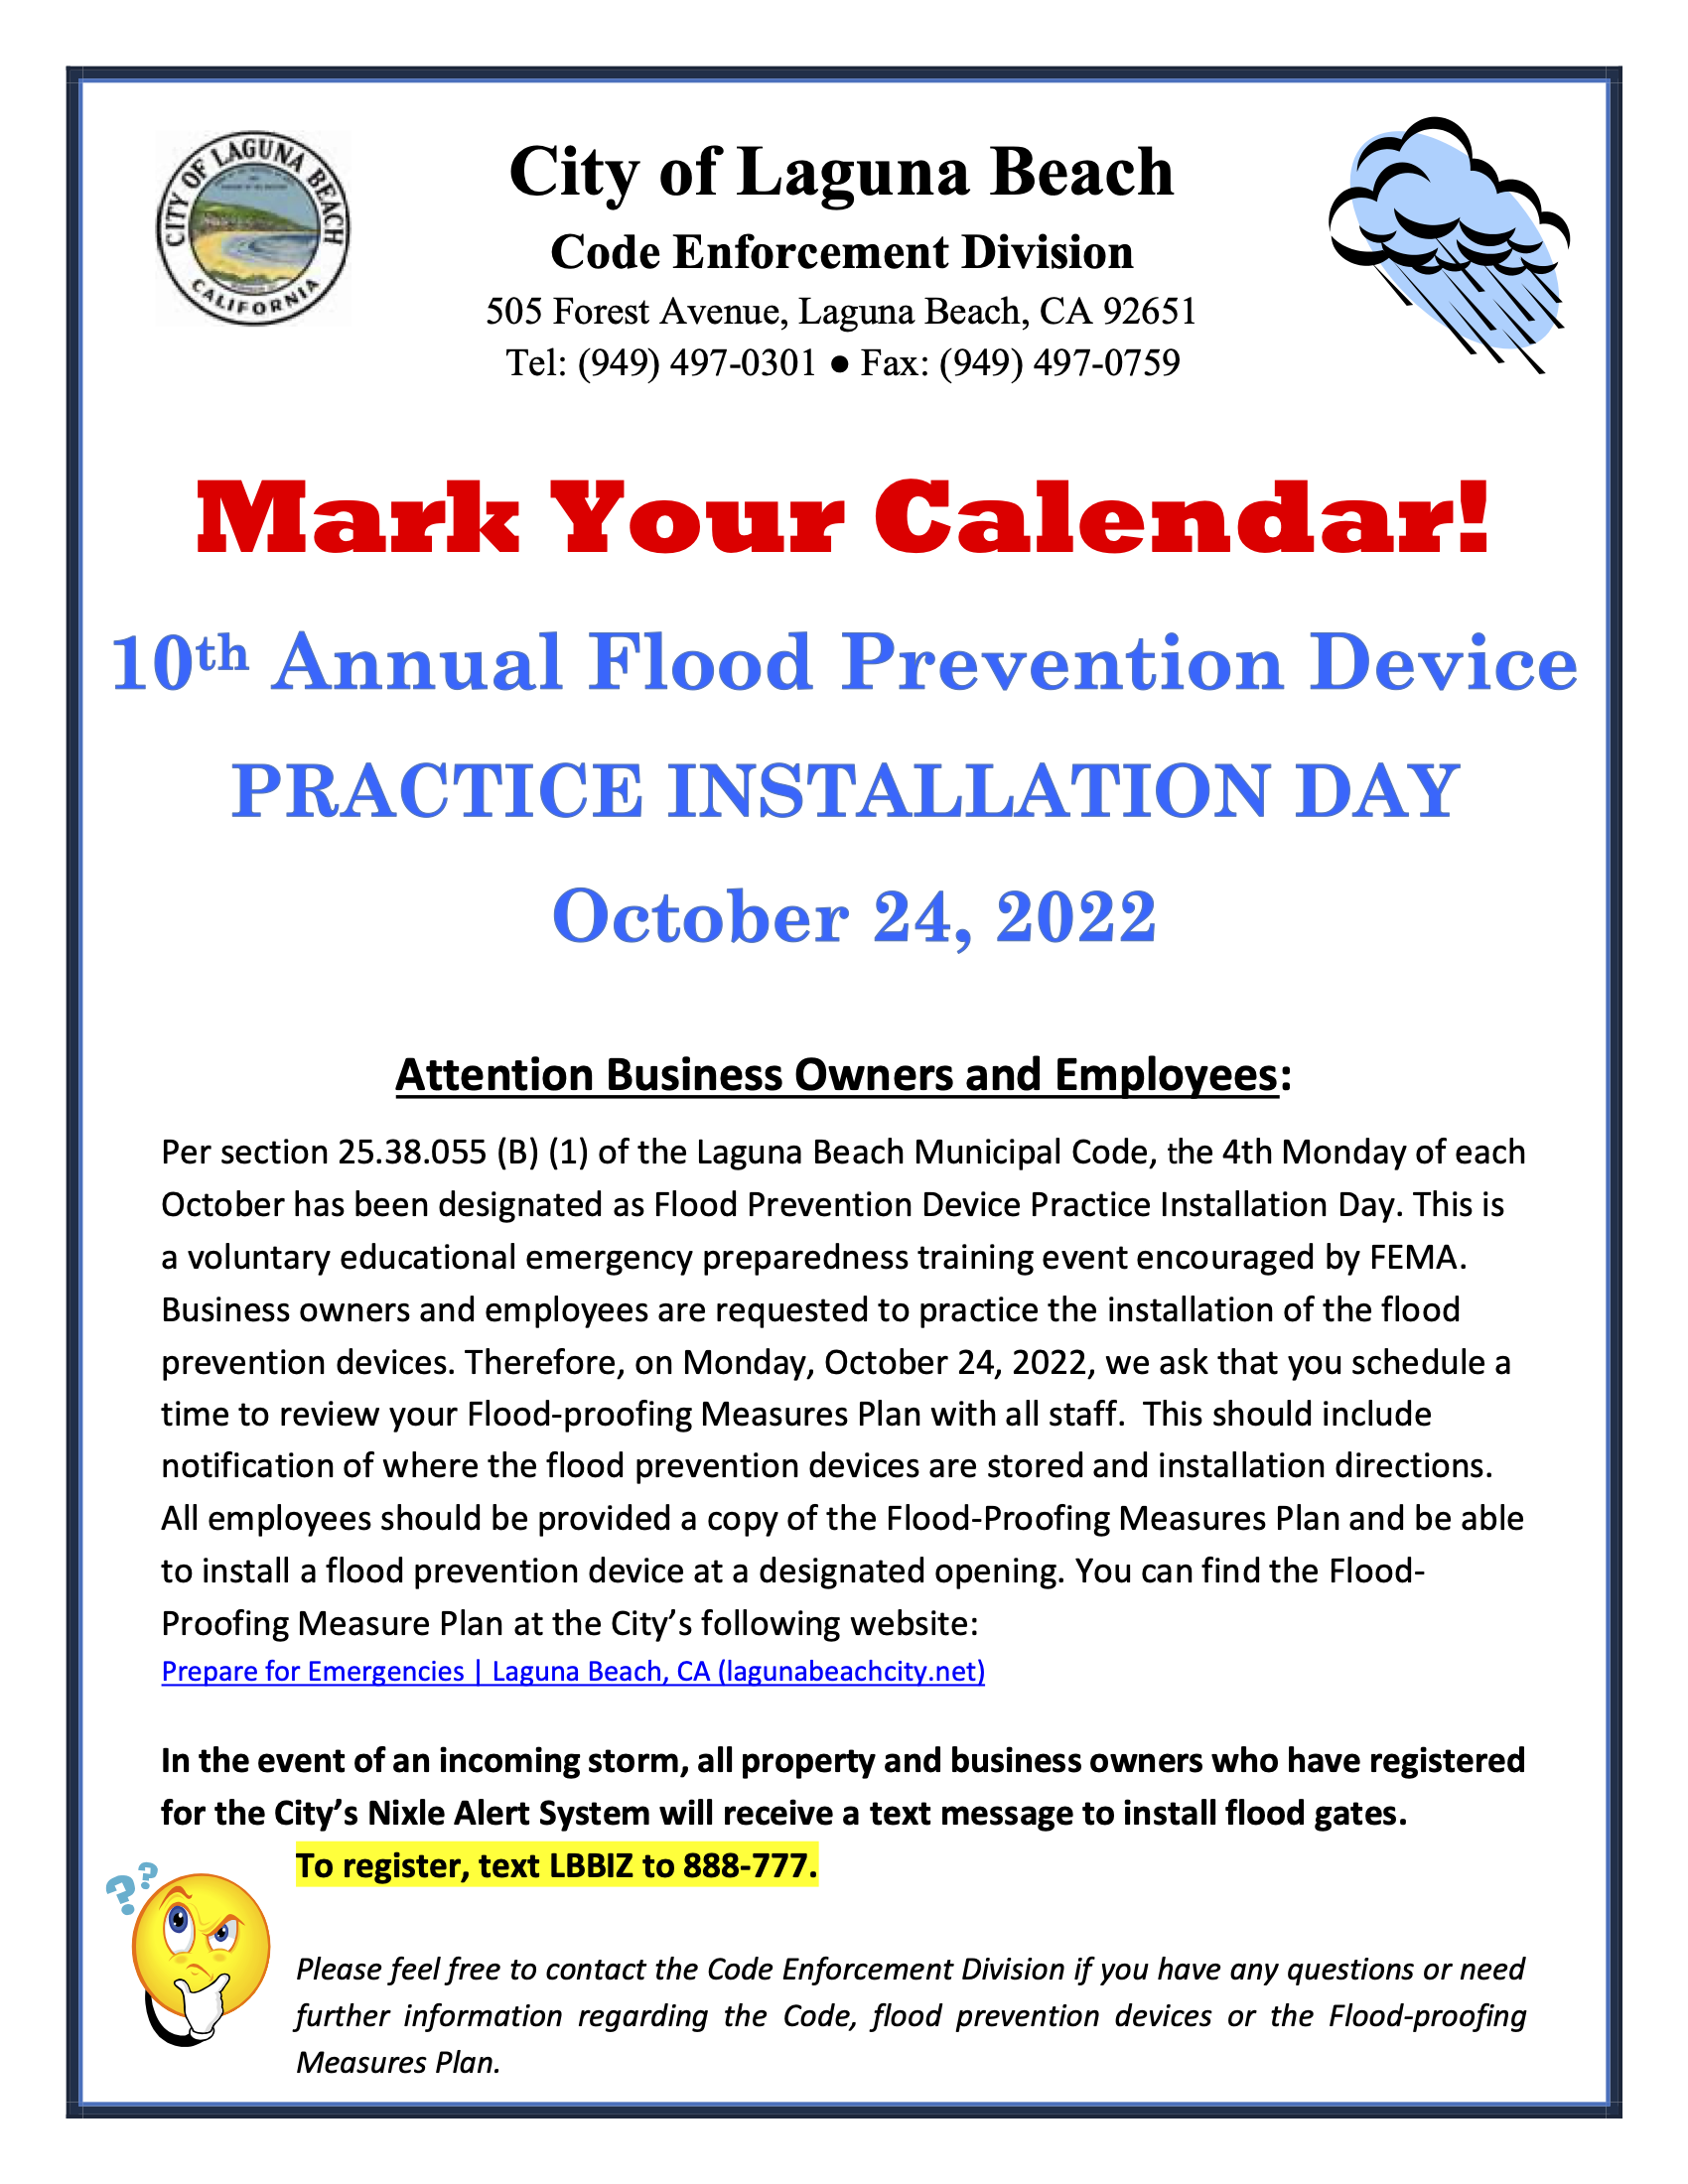 10 th Annual Floodproofing Measures Plan Practice Session - FLYER_MW Edits